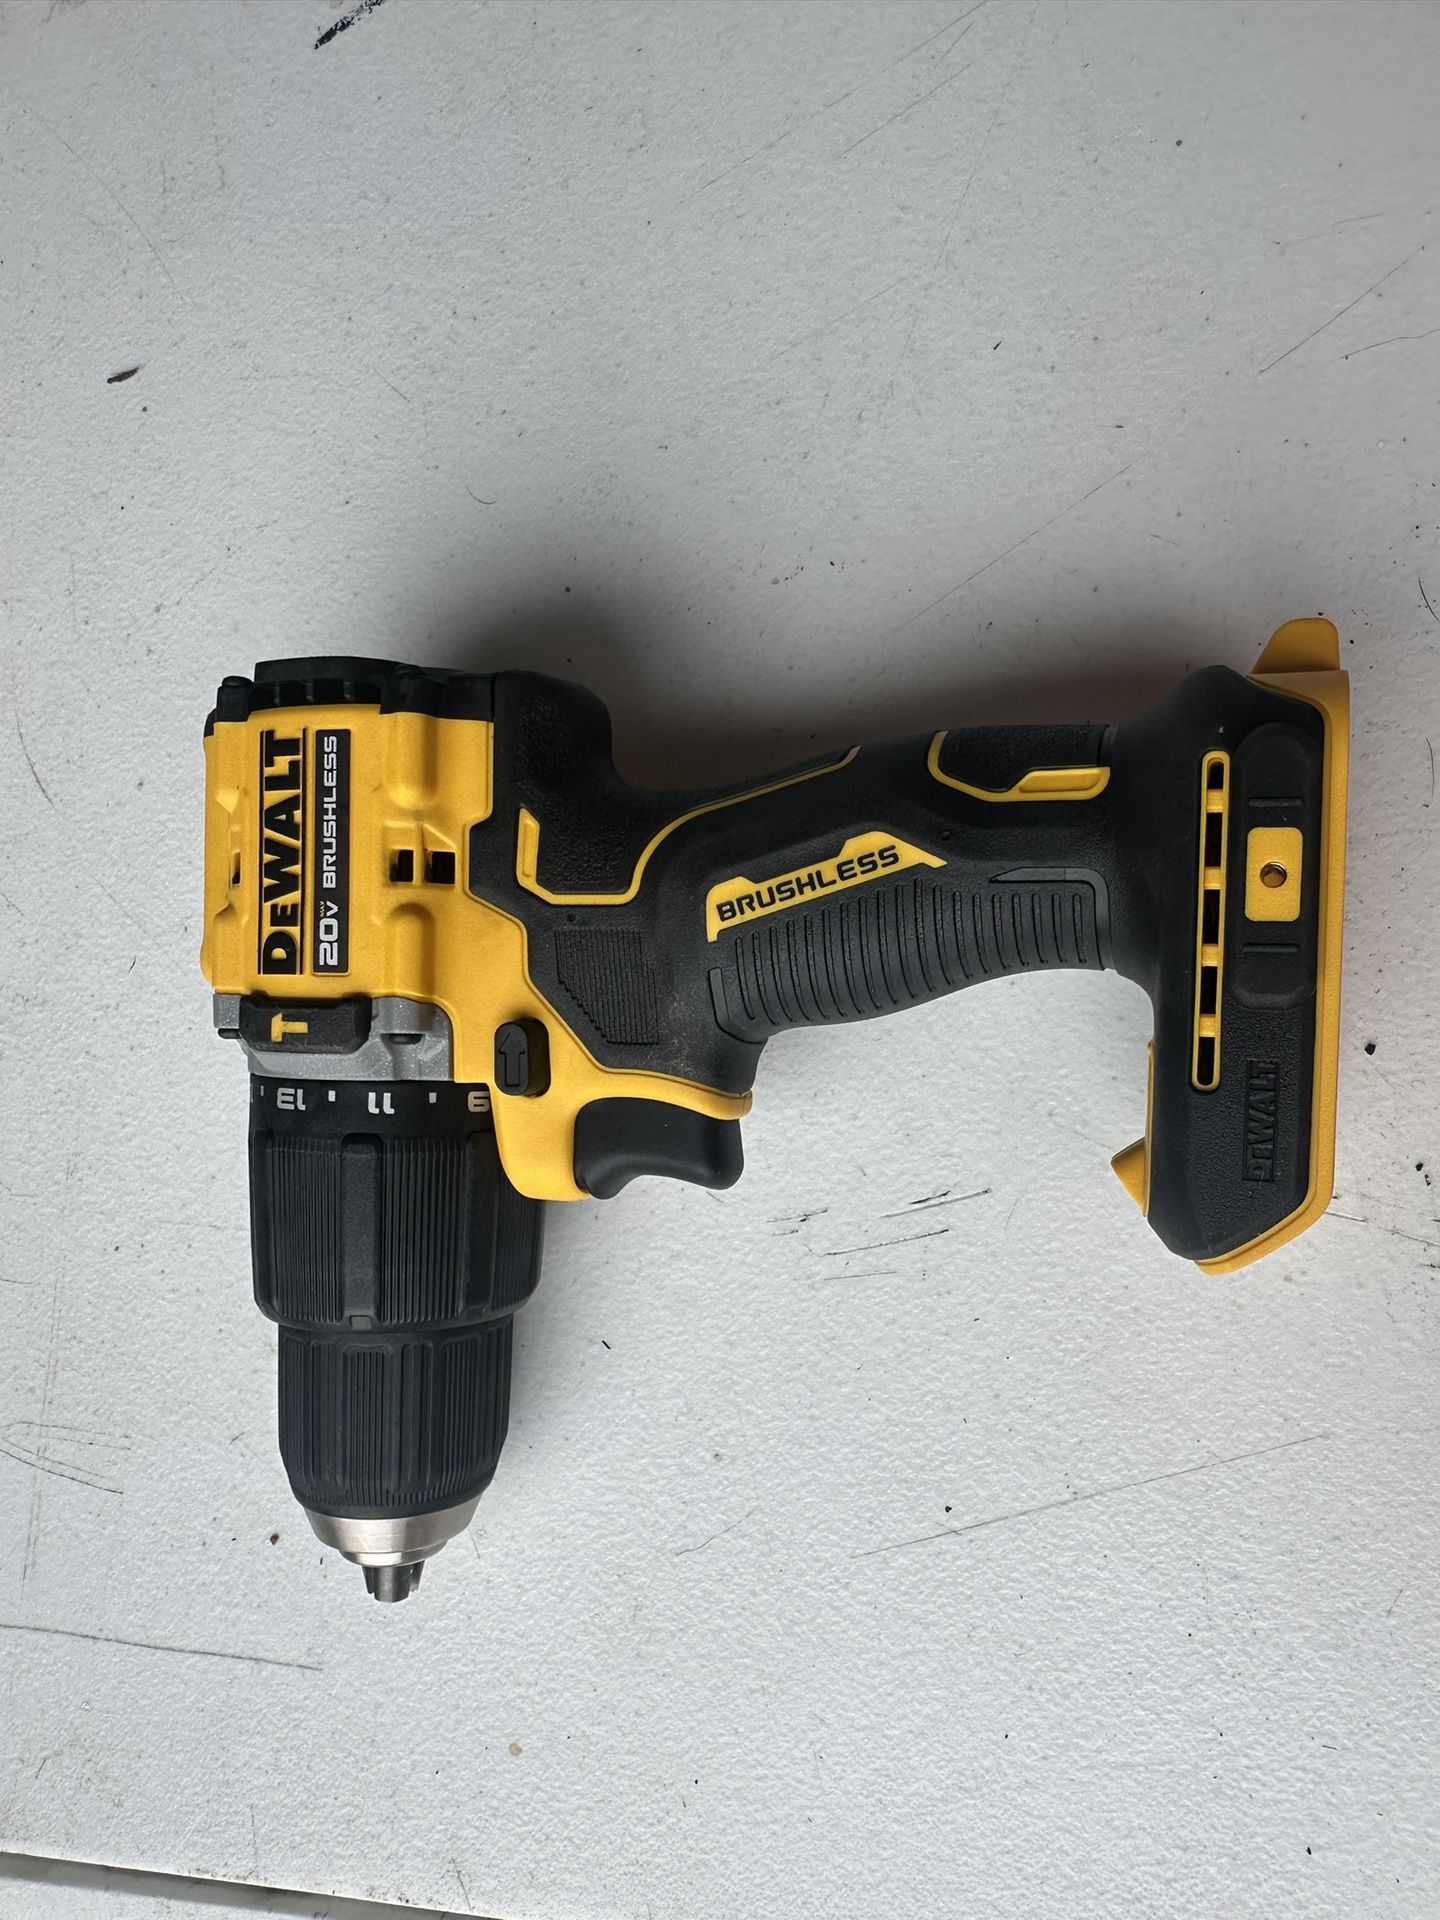 Dewalt ATOMIC 20V MAX Cordless Brushless Compact 1/2 in. Hammer Drill